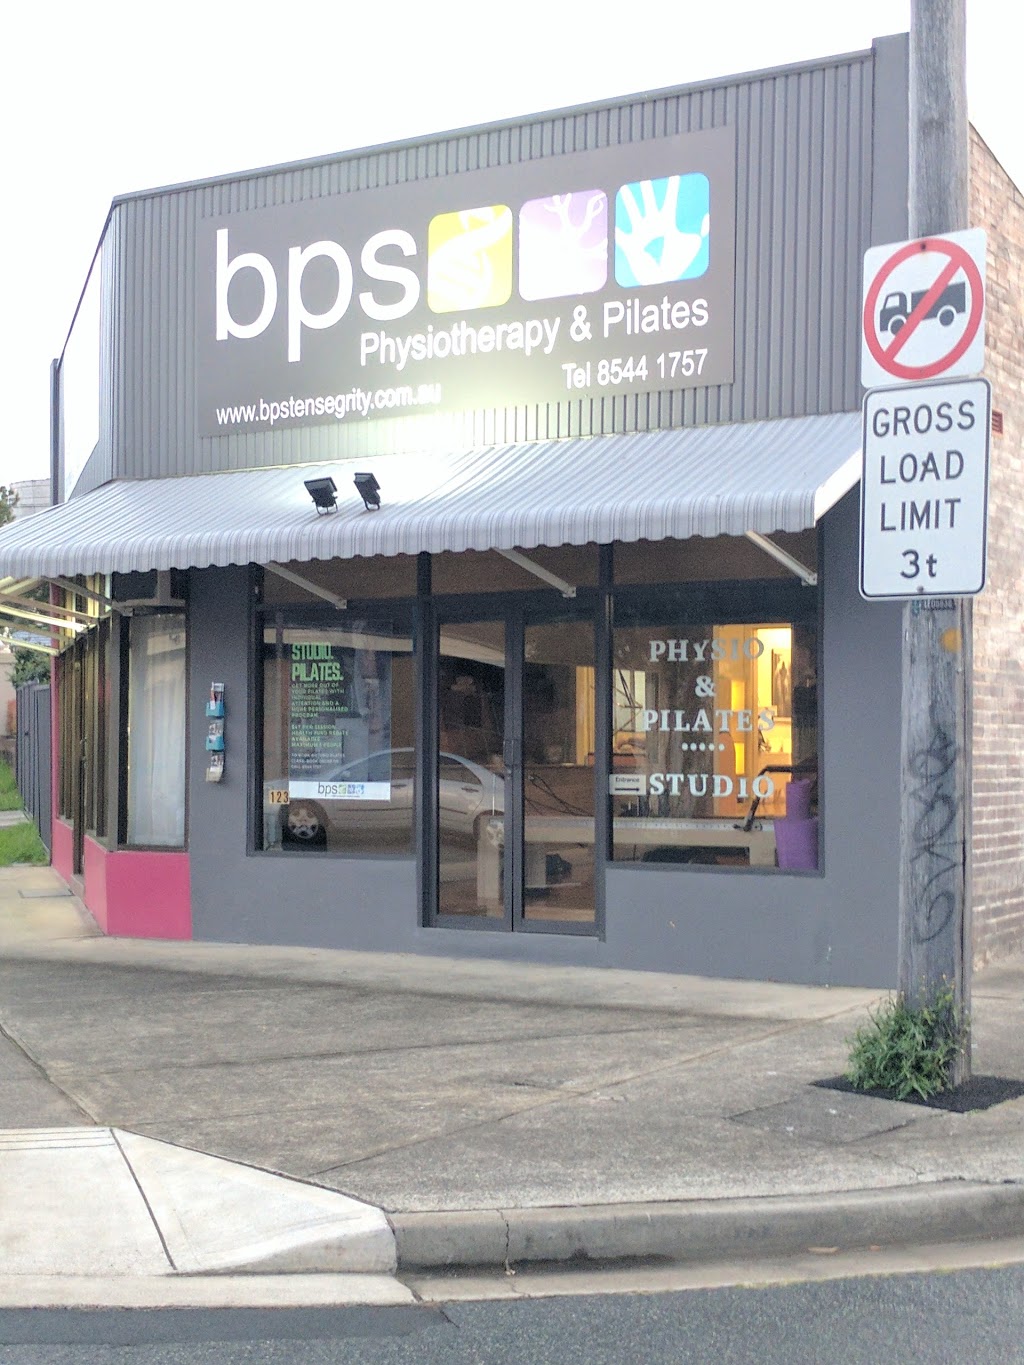 BPS Tensegrity Physiotherapy and Pilates Ashbury | physiotherapist | 123 Holden st Ashbury, Sydney NSW 2193, Australia | 0285441757 OR +61 2 8544 1757